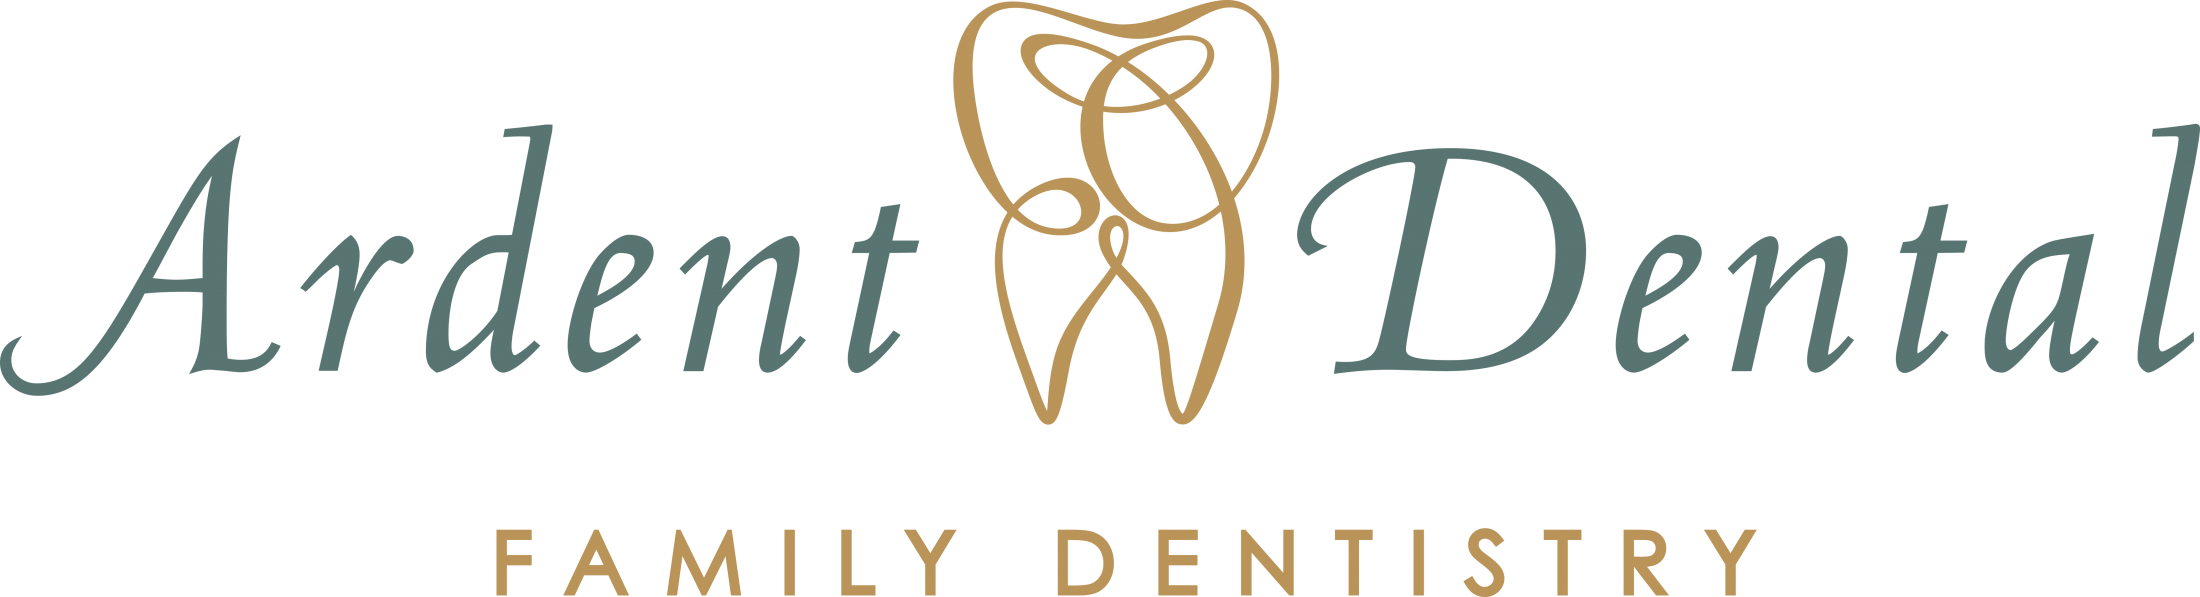 Link to Ardent Dental home page